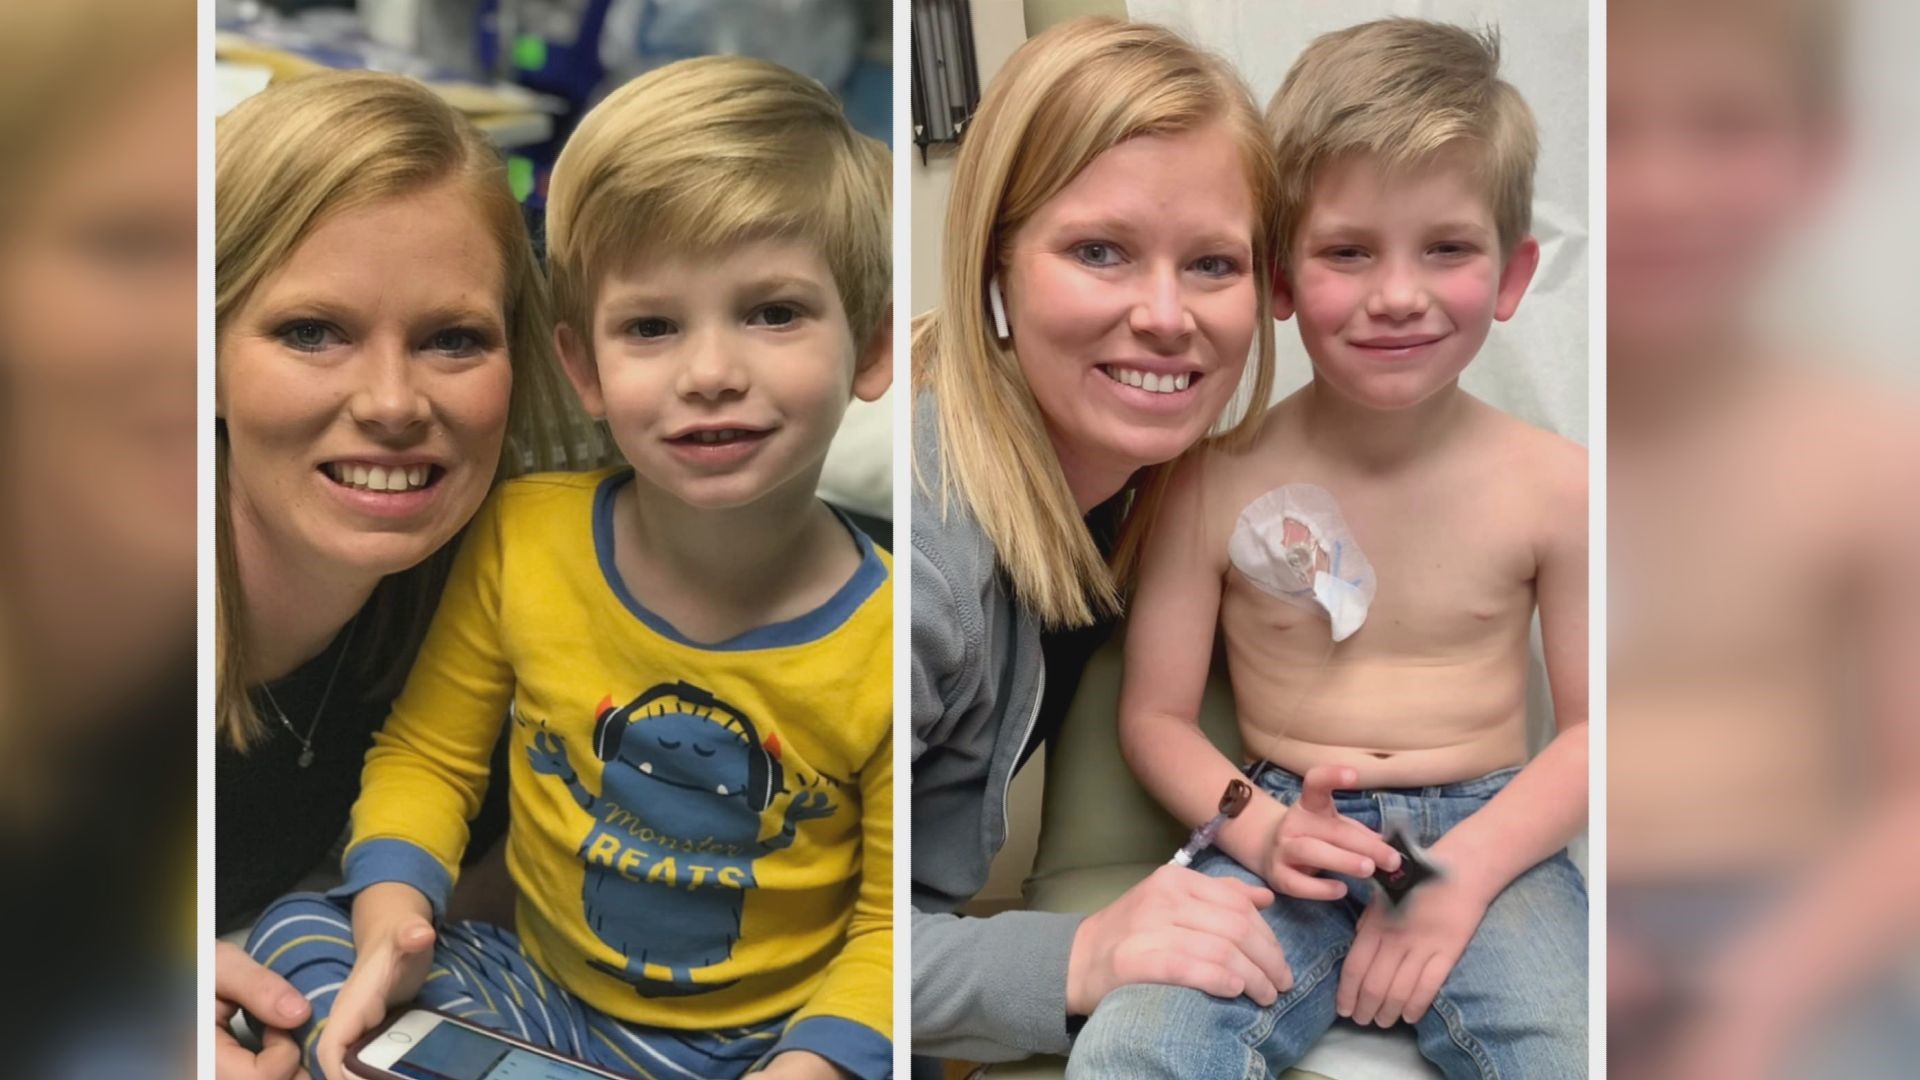 Kyler Pike was diagnosed with cancer in 2017 at three years old.